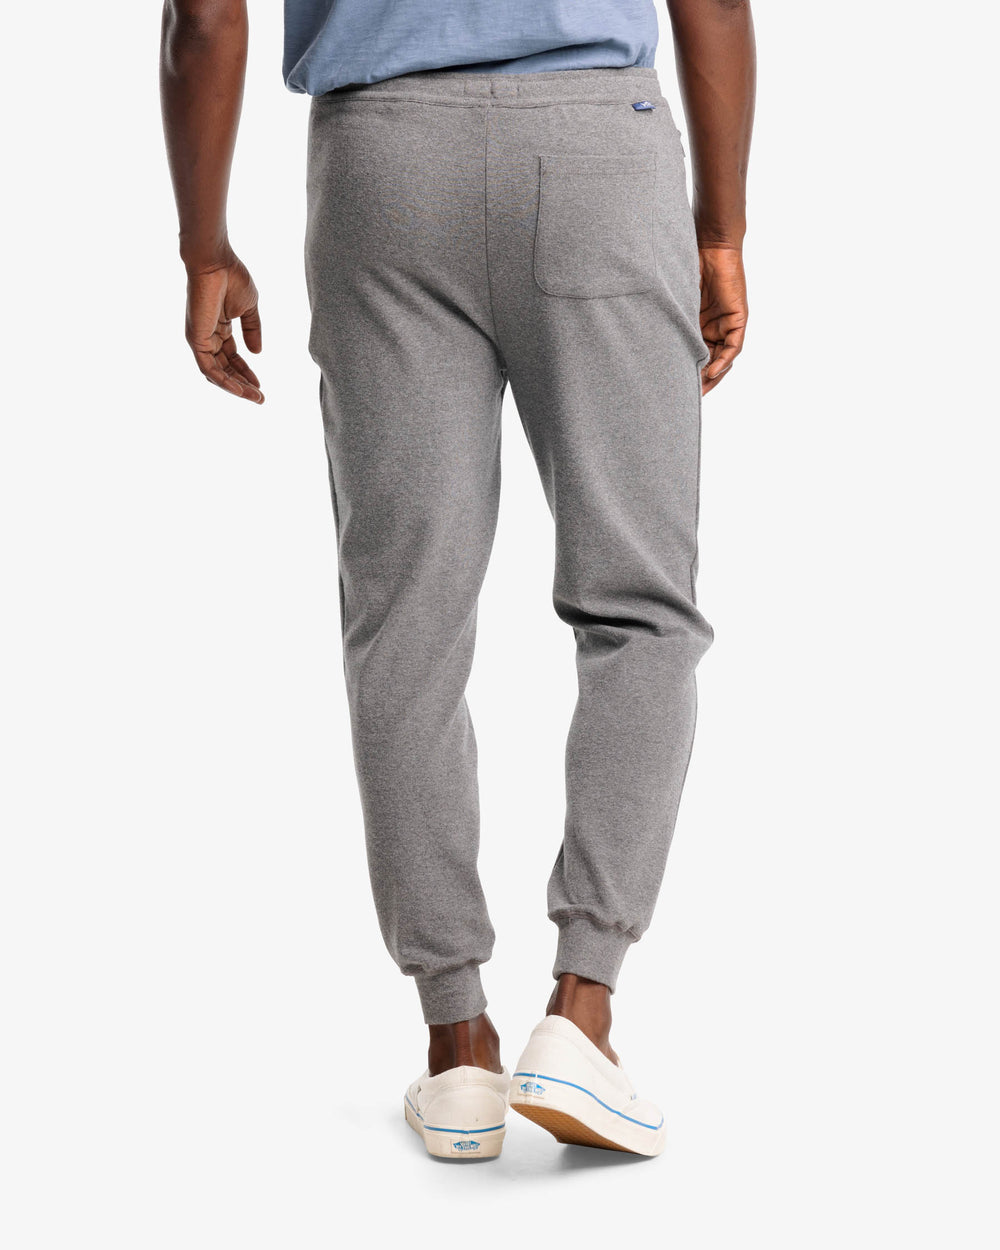 The back view of the Backrush Heather Jogger by Southern Tide - Heather Steel Grey